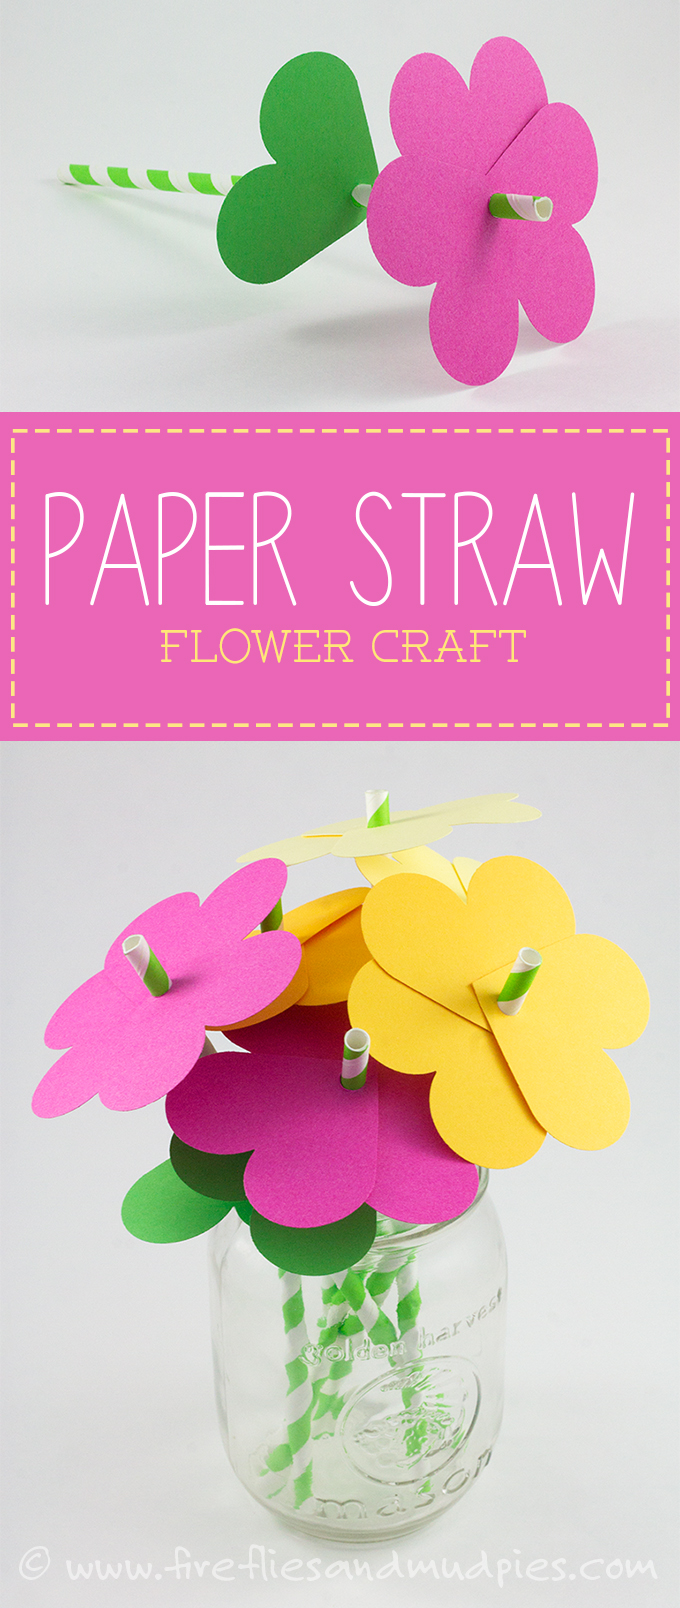 Flower Crafts for teens * Moms and Crafters